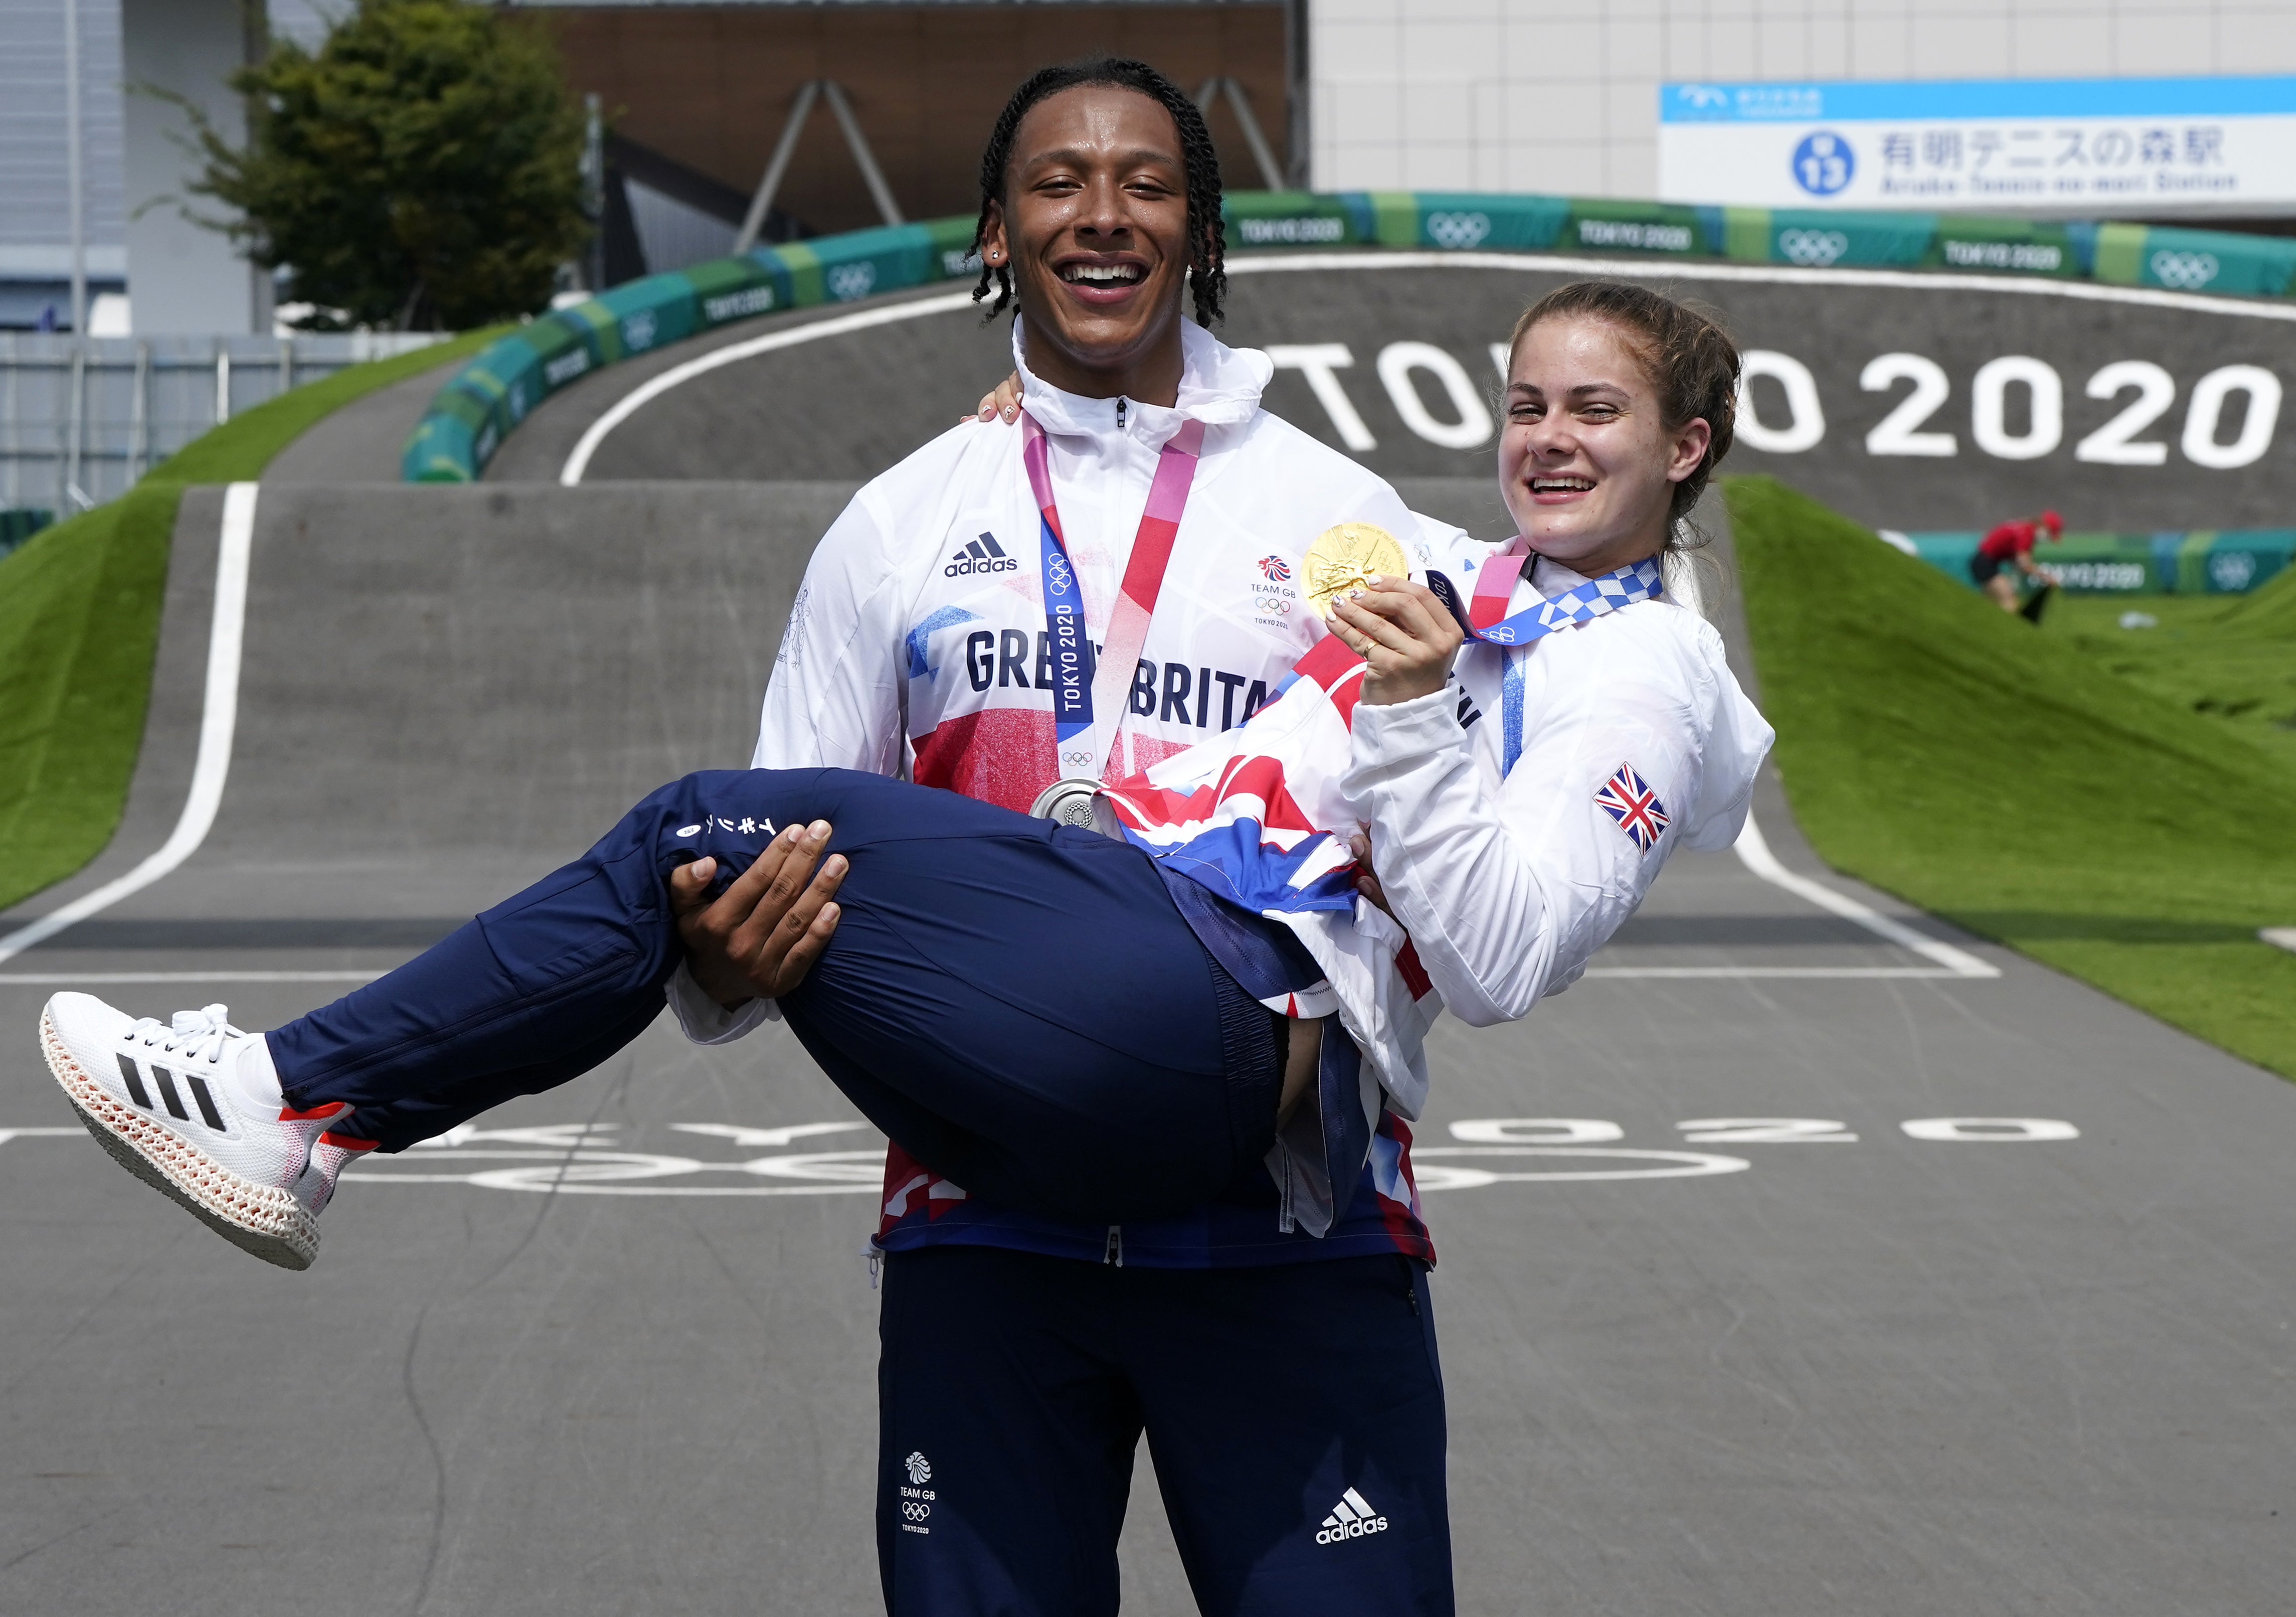 BMX medallists Kye Whyte and Beth Shriever (Danny Lawson/PA)